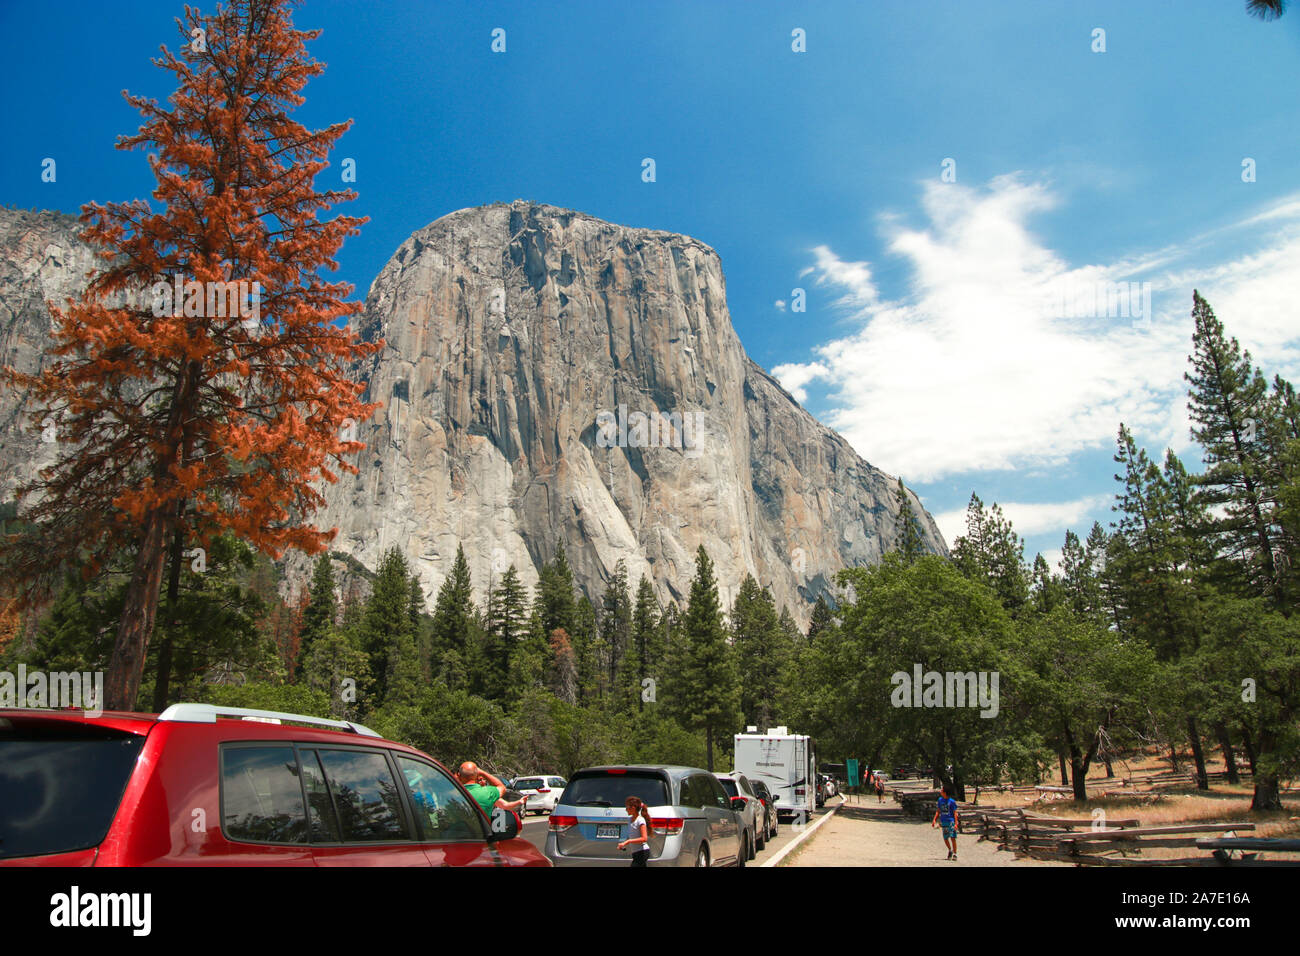 Yosemite National Park, California, USA - July 10, 2017: Tourists on their way to Yosemite Valley, passing by El Capitan - granite rock known for its Stock Photo